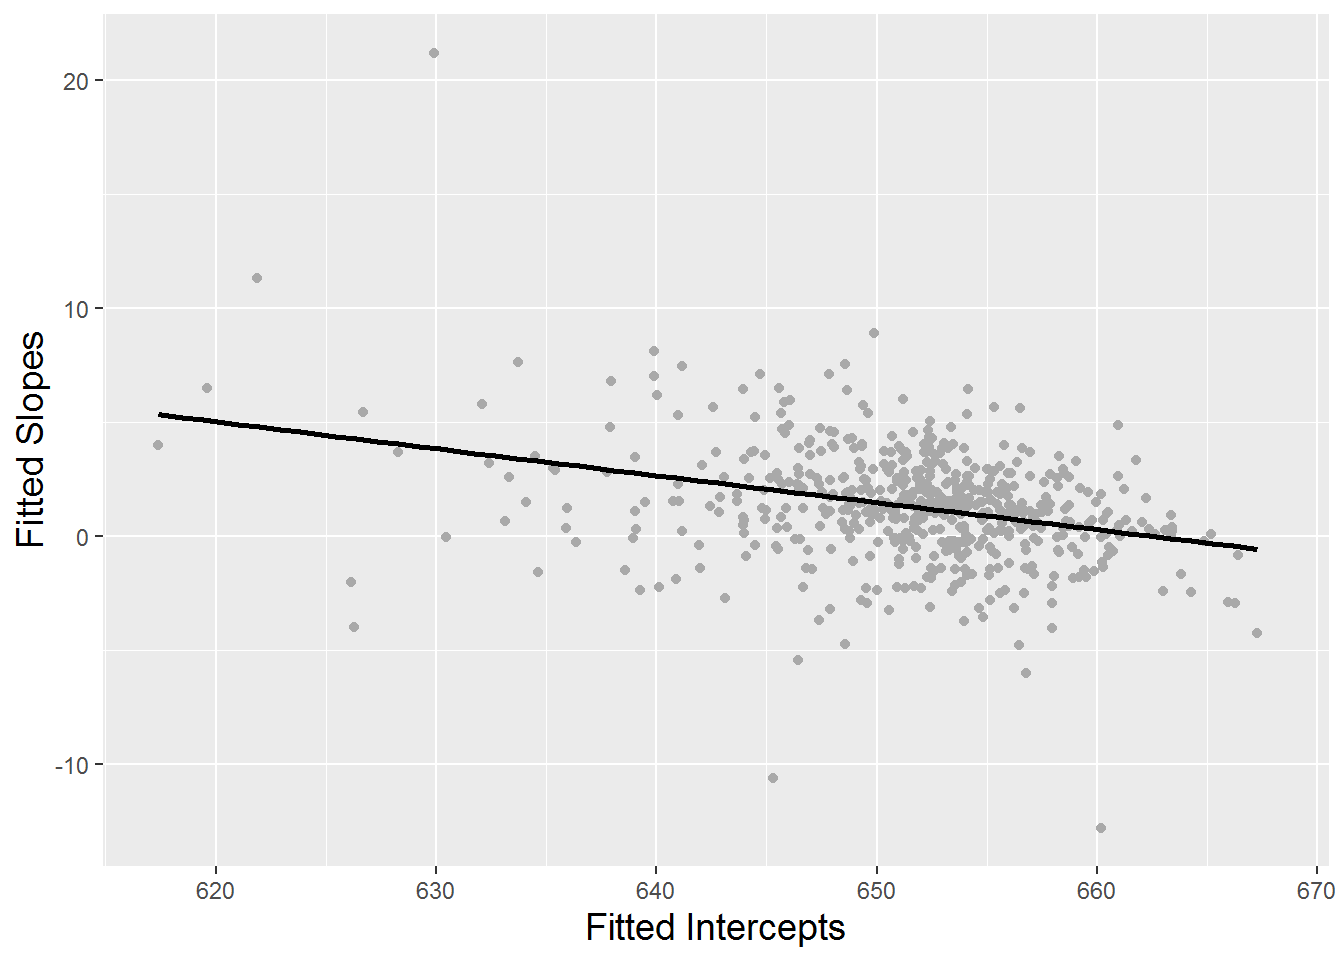 Scatterplot showing the relationship between intercepts and slopes from fitted regression lines by school.